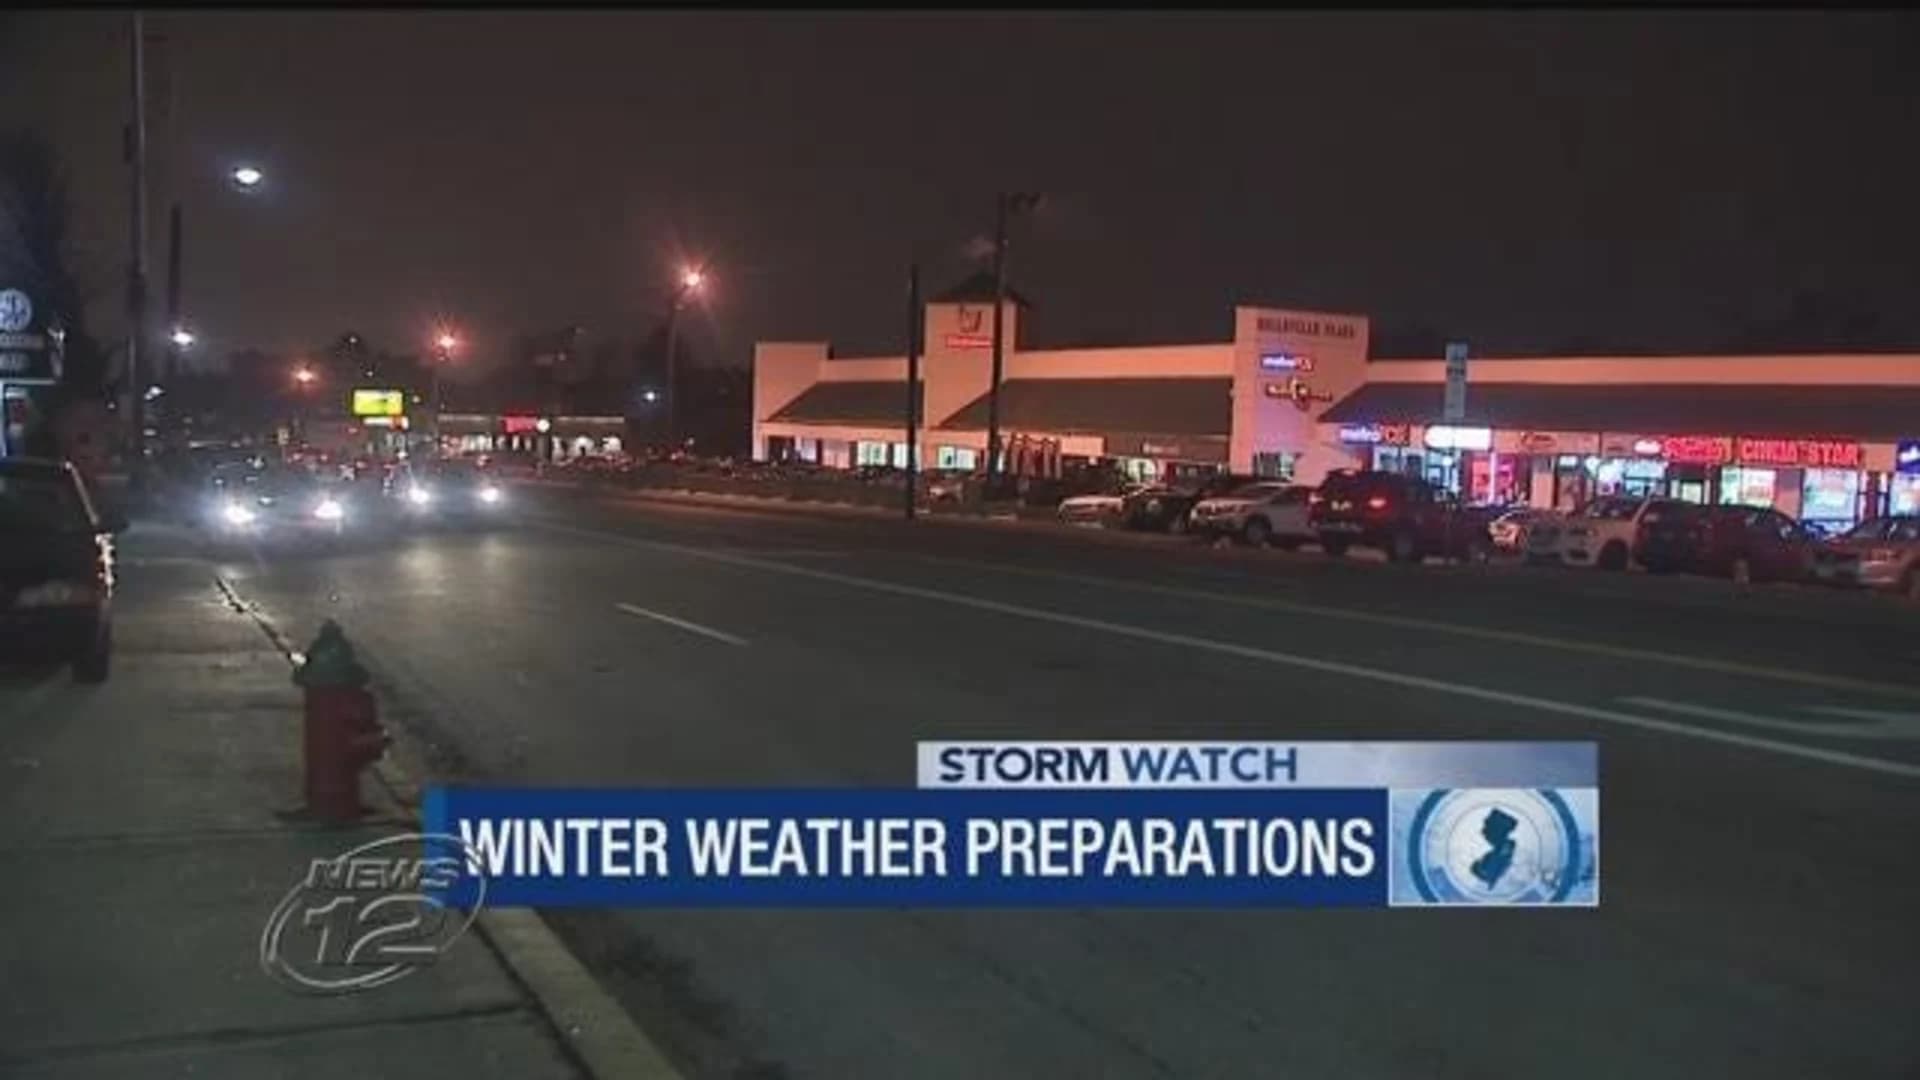 New Jersey hunkers down ahead of weekend snow